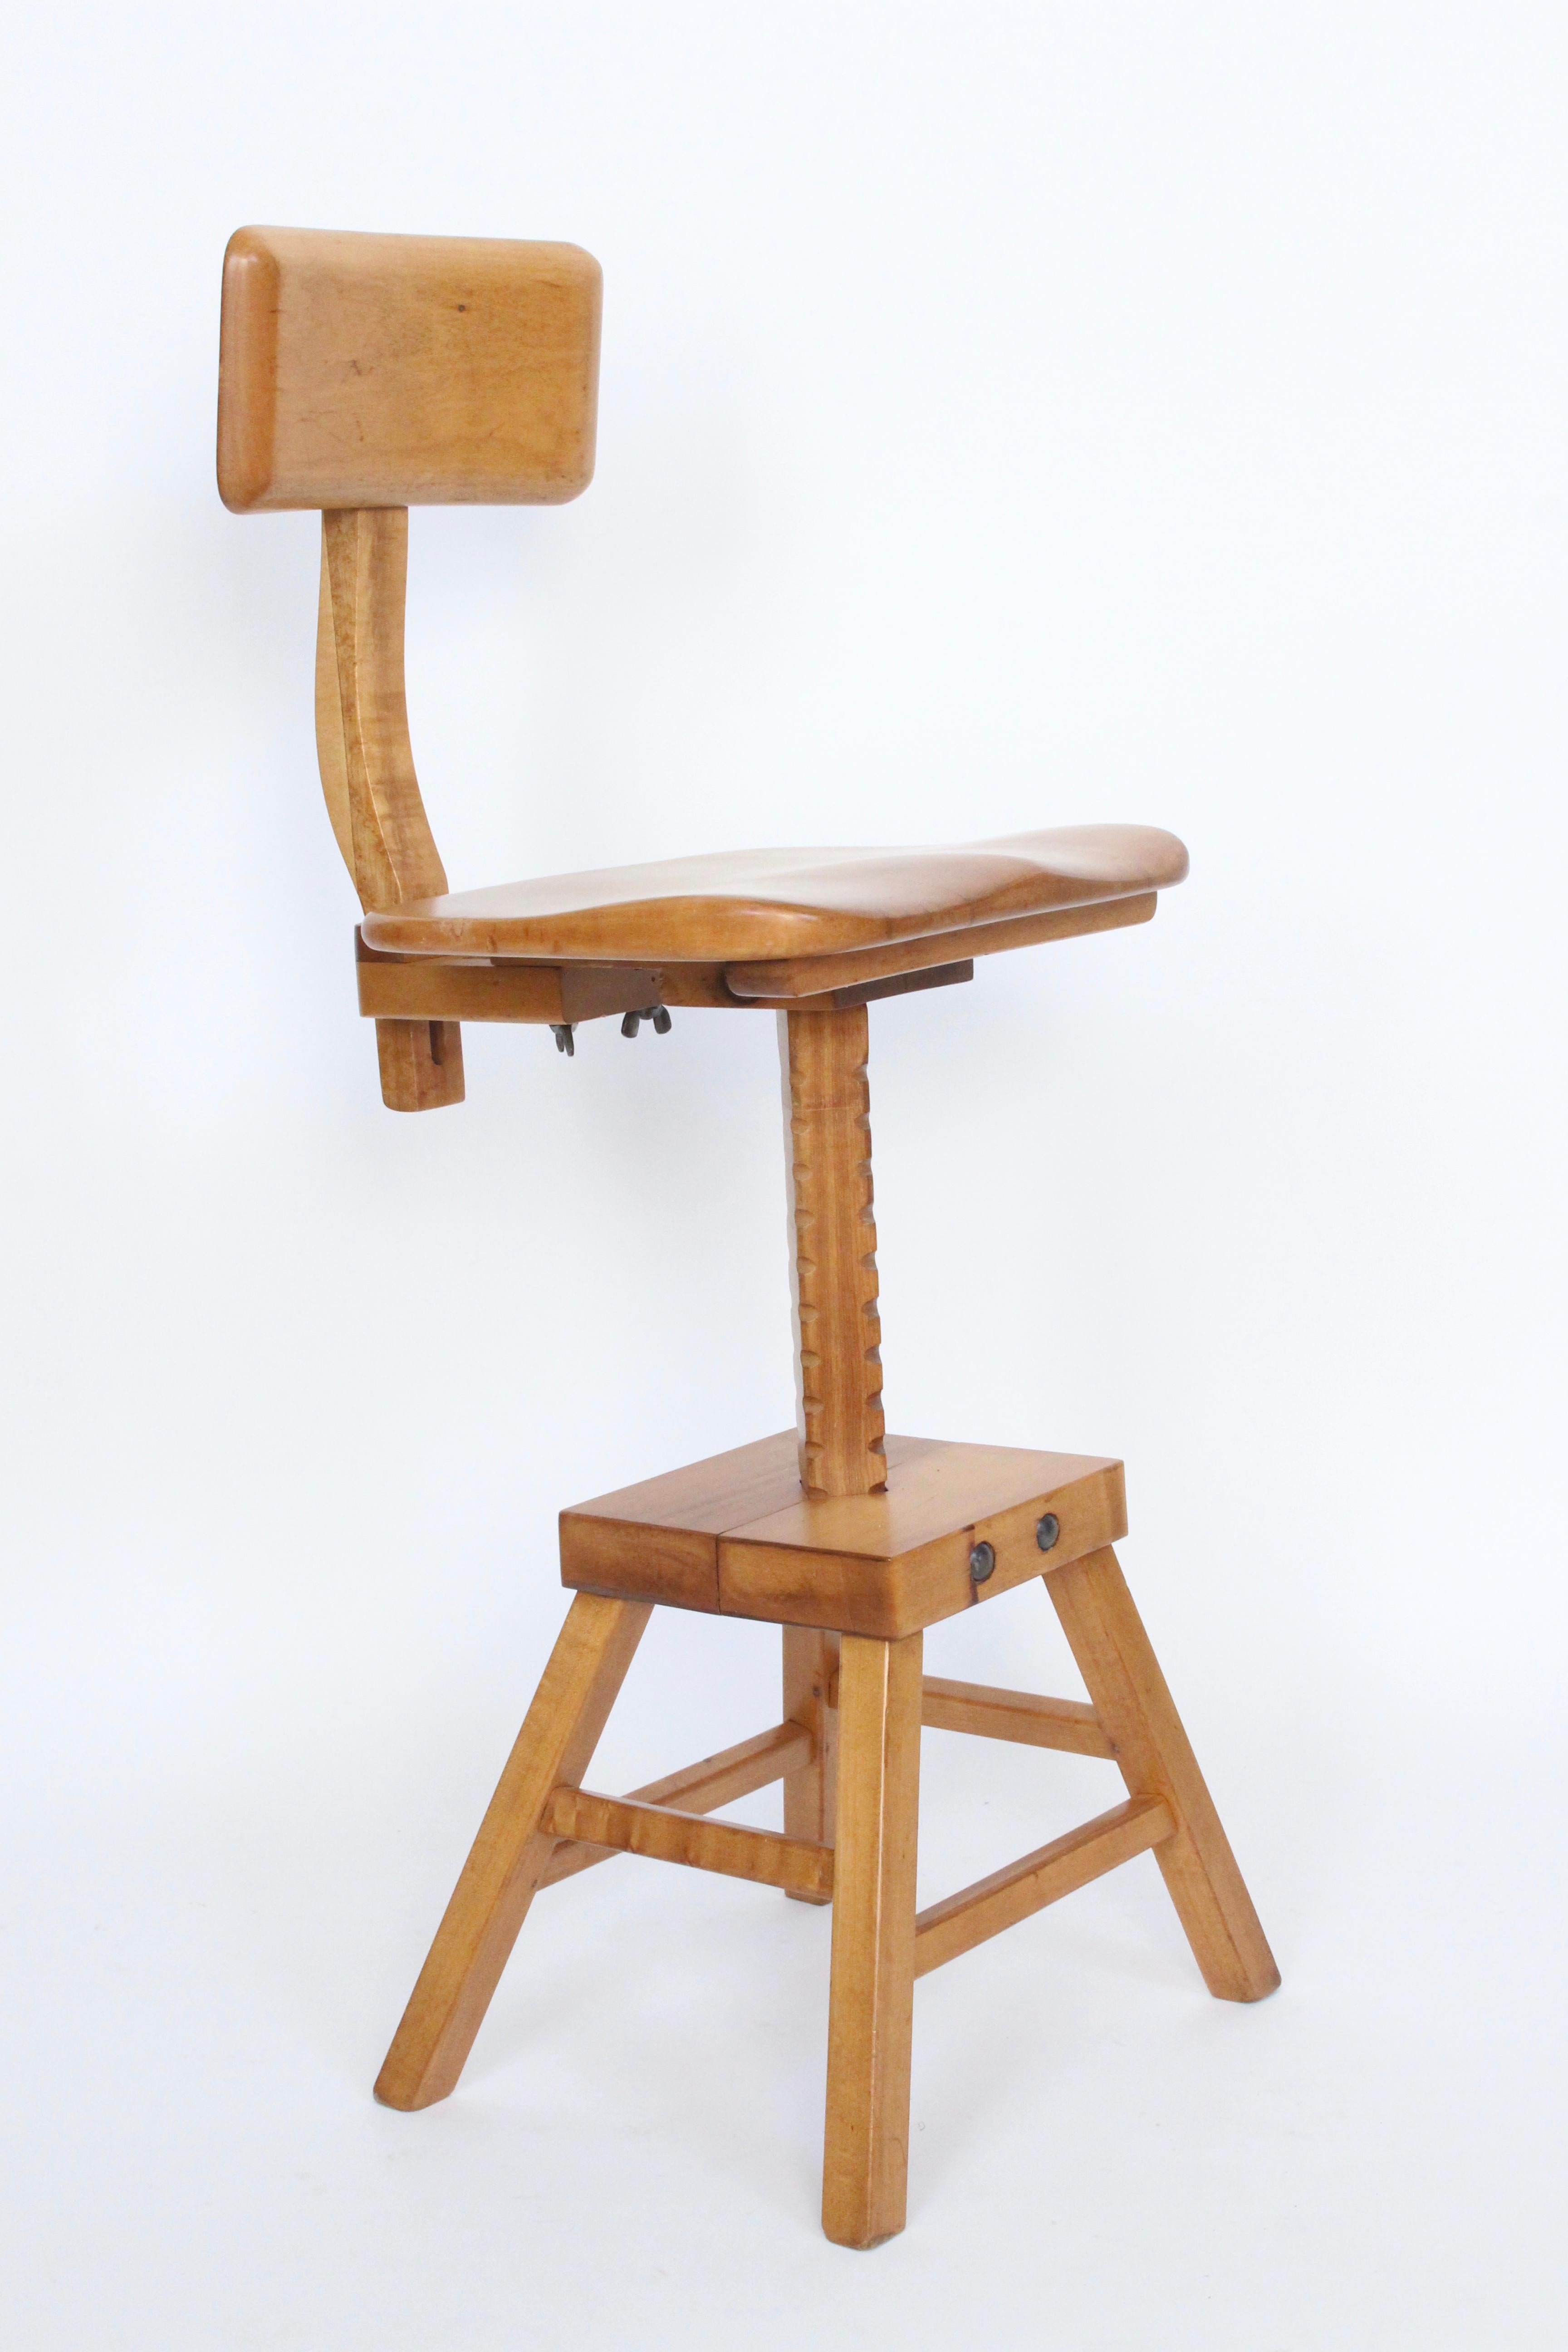 20th Century Set of Four Edward L. Koenig Adjustable Architects Chairs in Maple, circa 1940